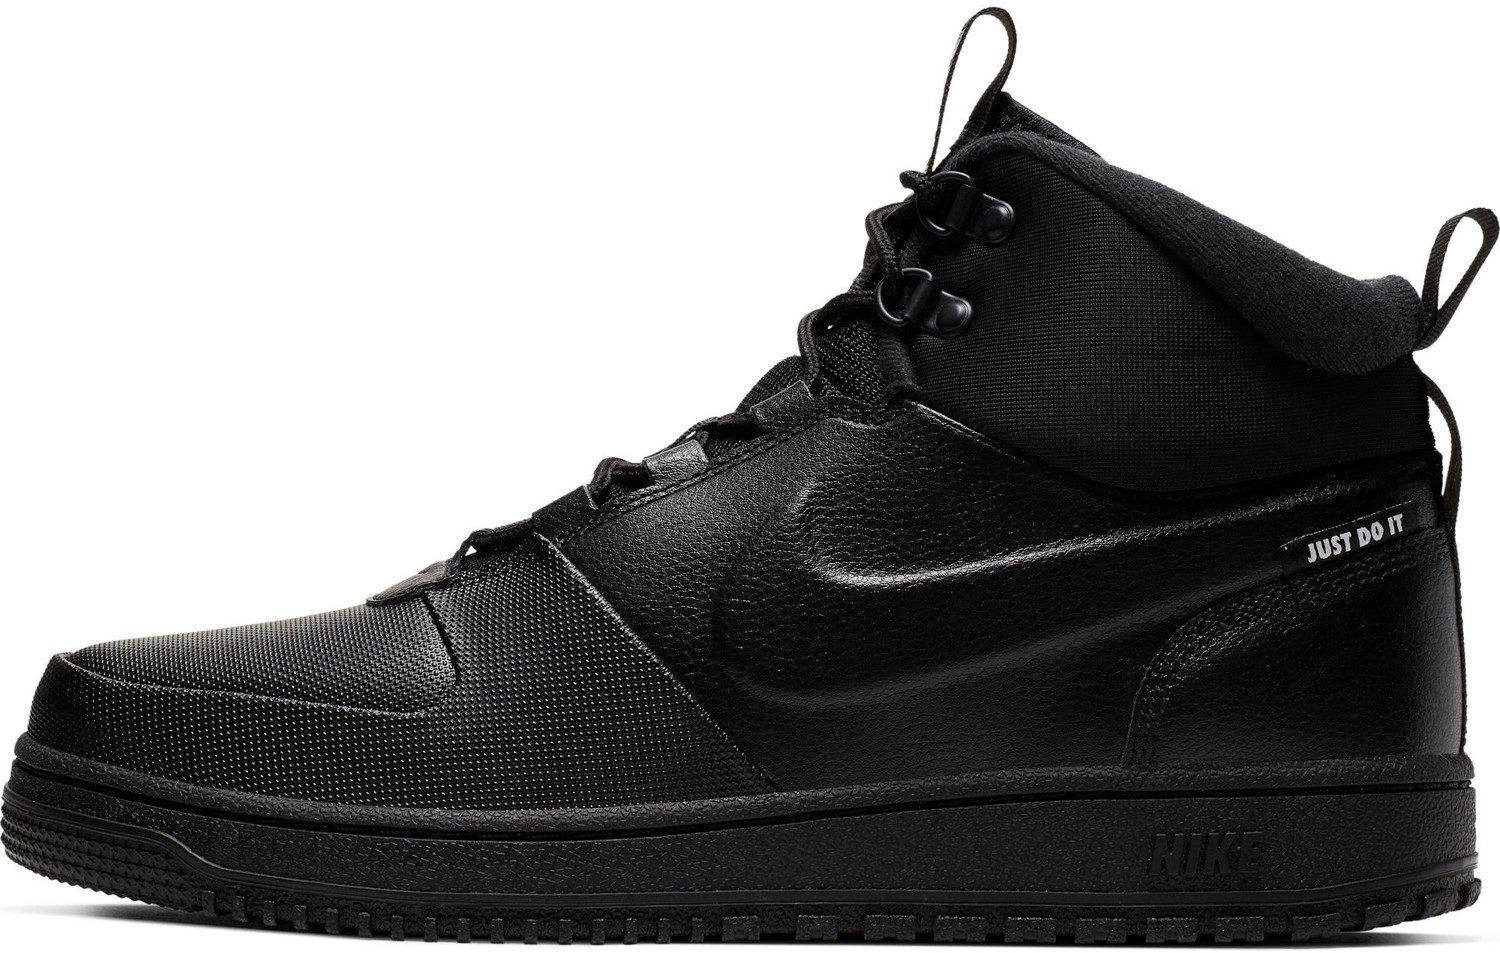 Buy Nike Path Winter black/black from £91.00 (Today) – Best Deals on ...